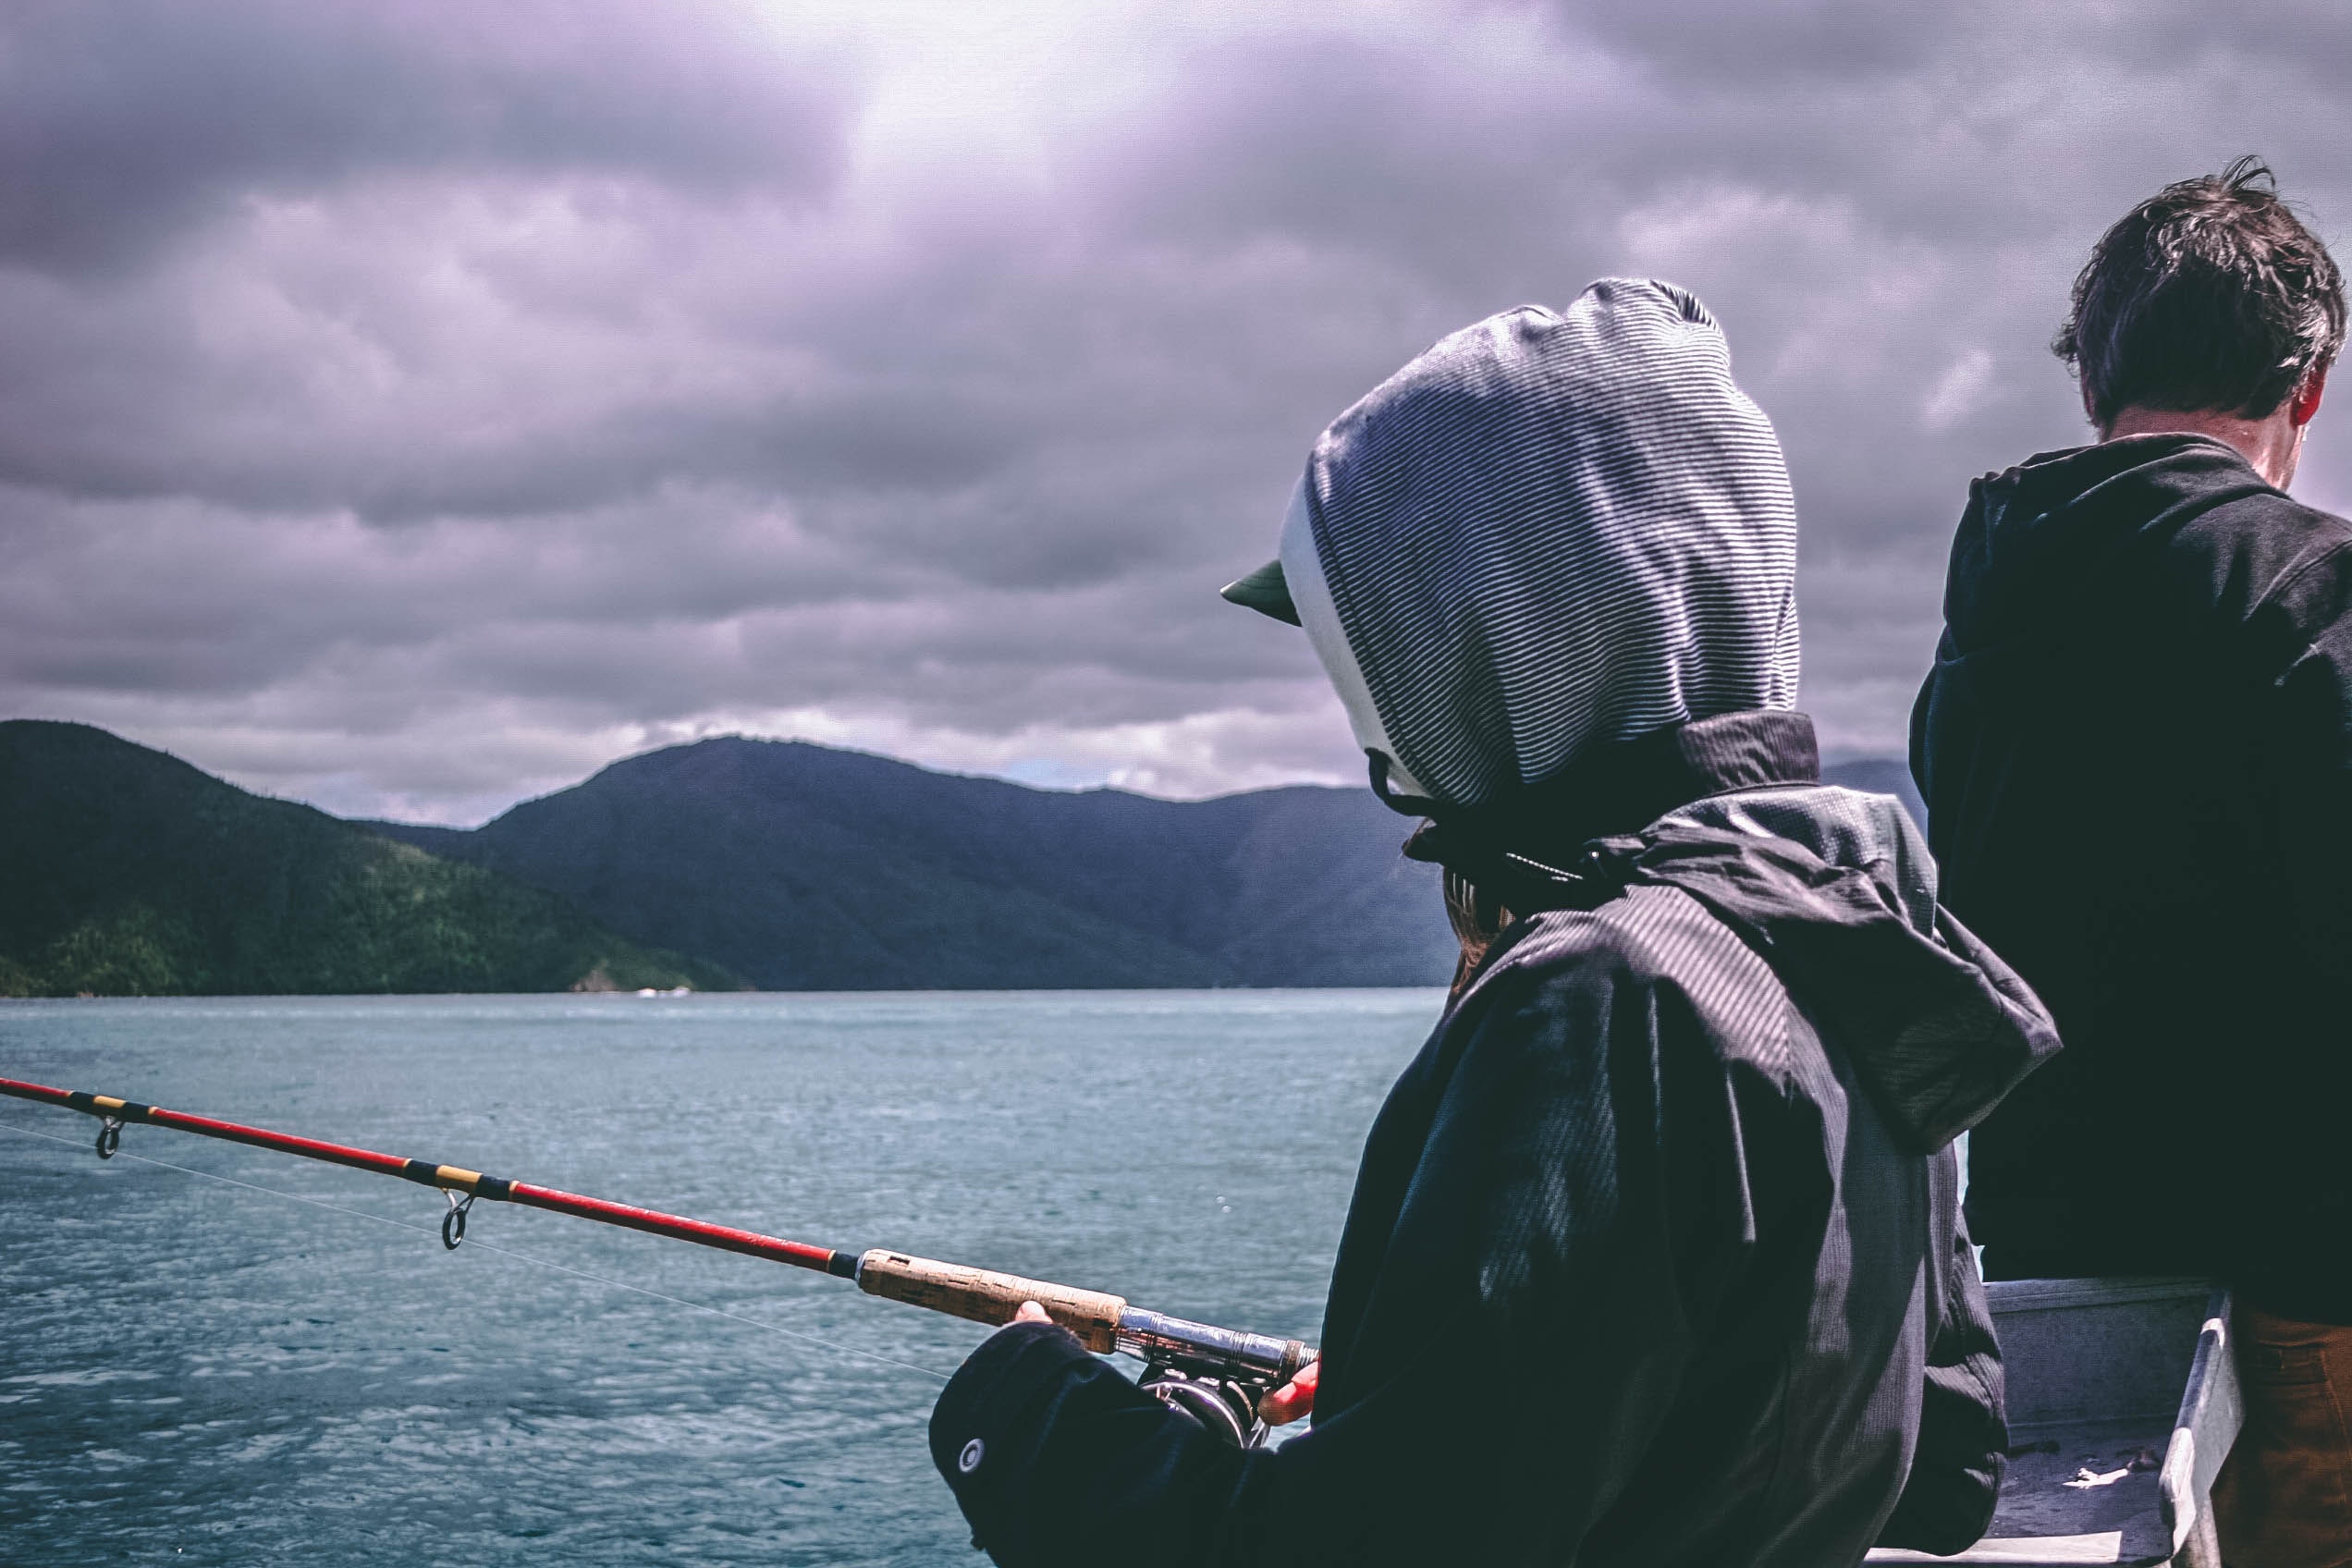 A person in a hooded jacket fishing on the water.